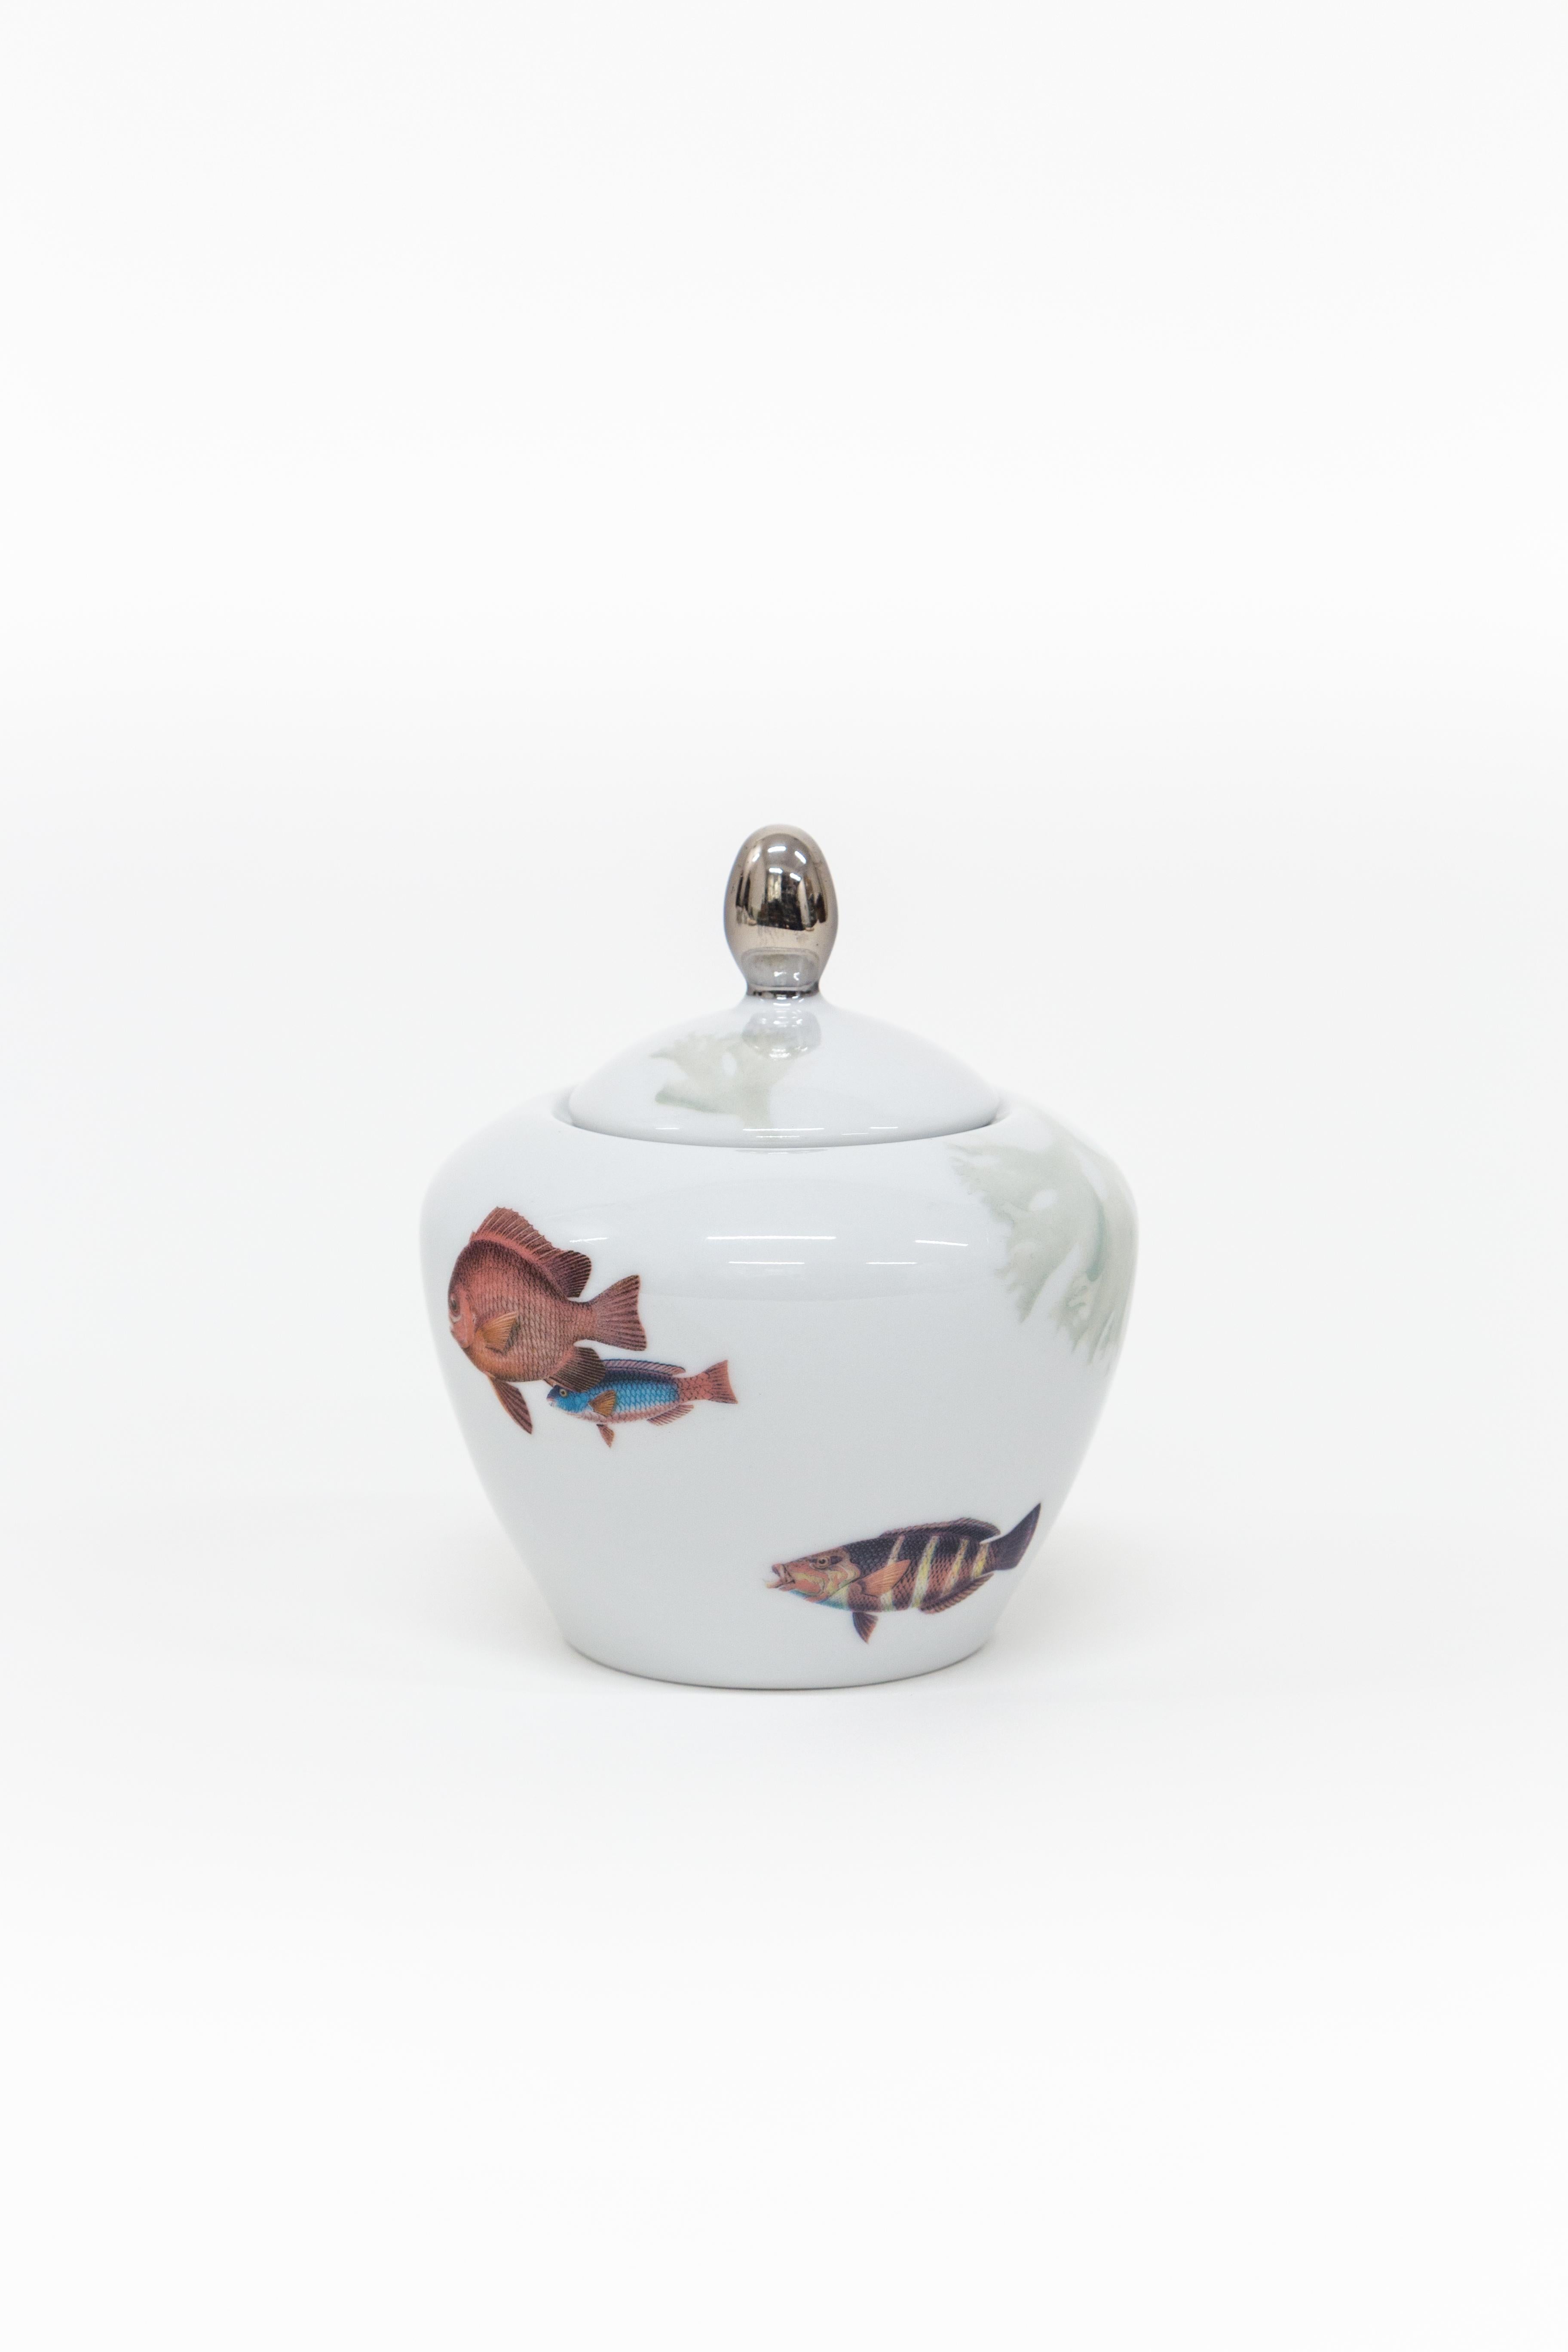 Other Amami, Contemporary Decorated Porcelain Tea Time Set by Vito Nesta For Sale